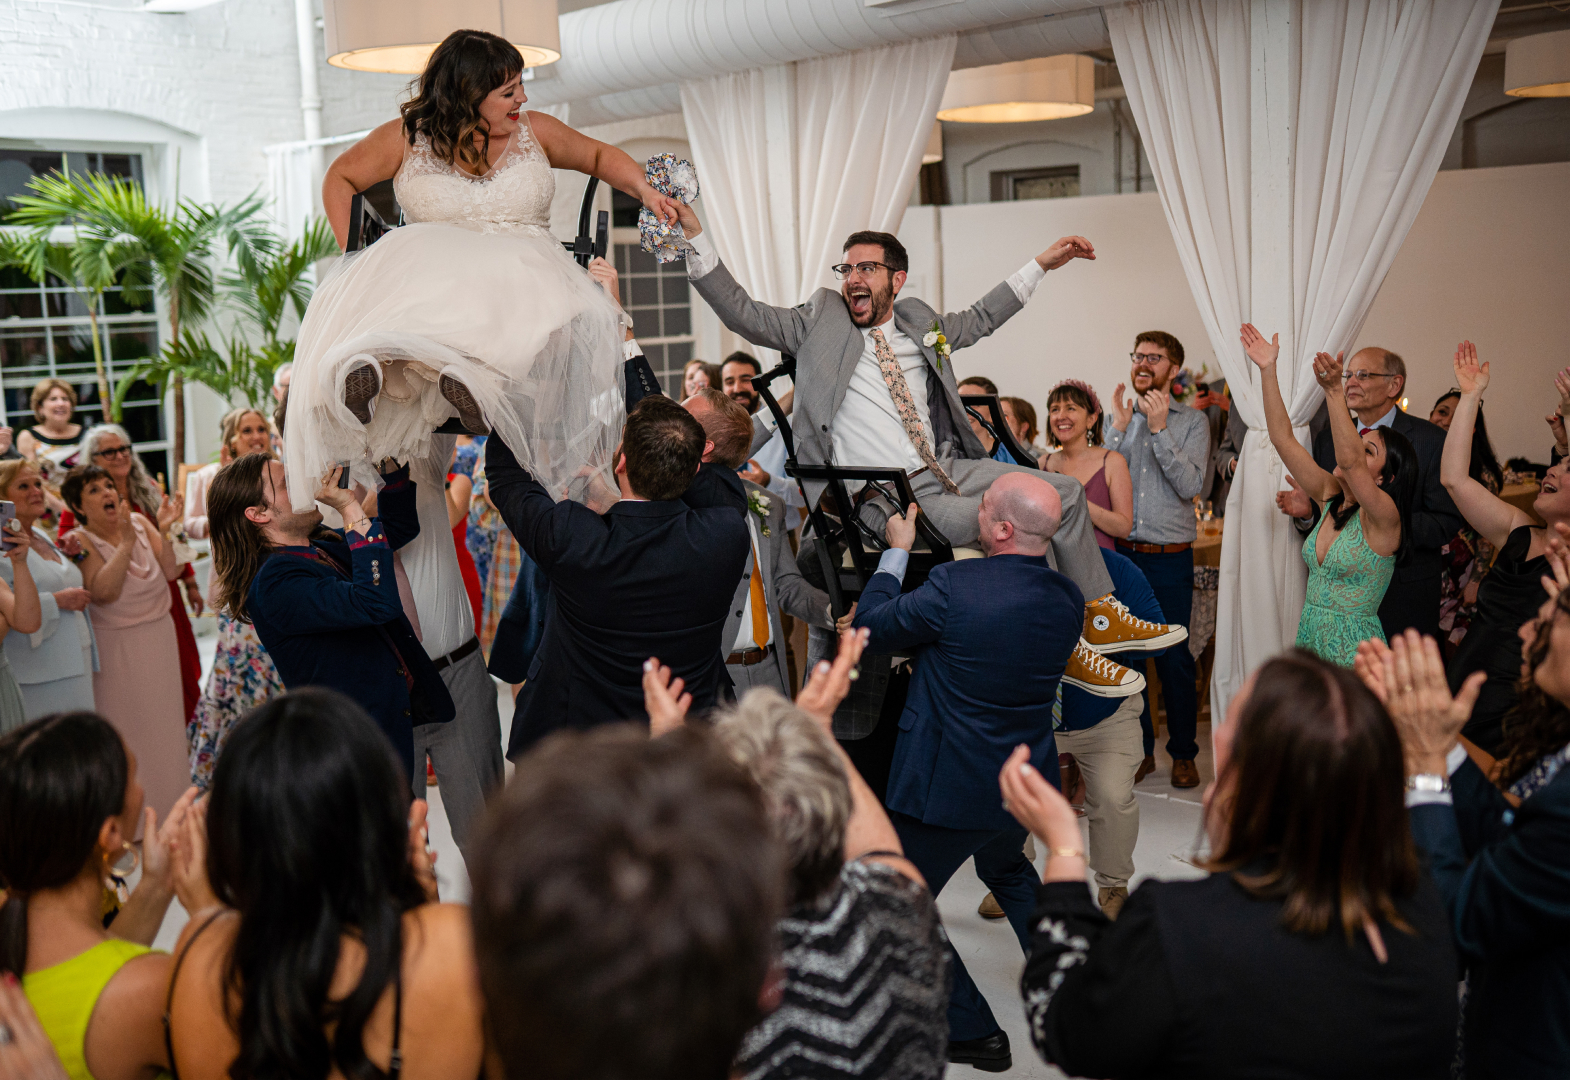 Guests dancing and holding up the bride and groom in chairs at a Jewish wedding